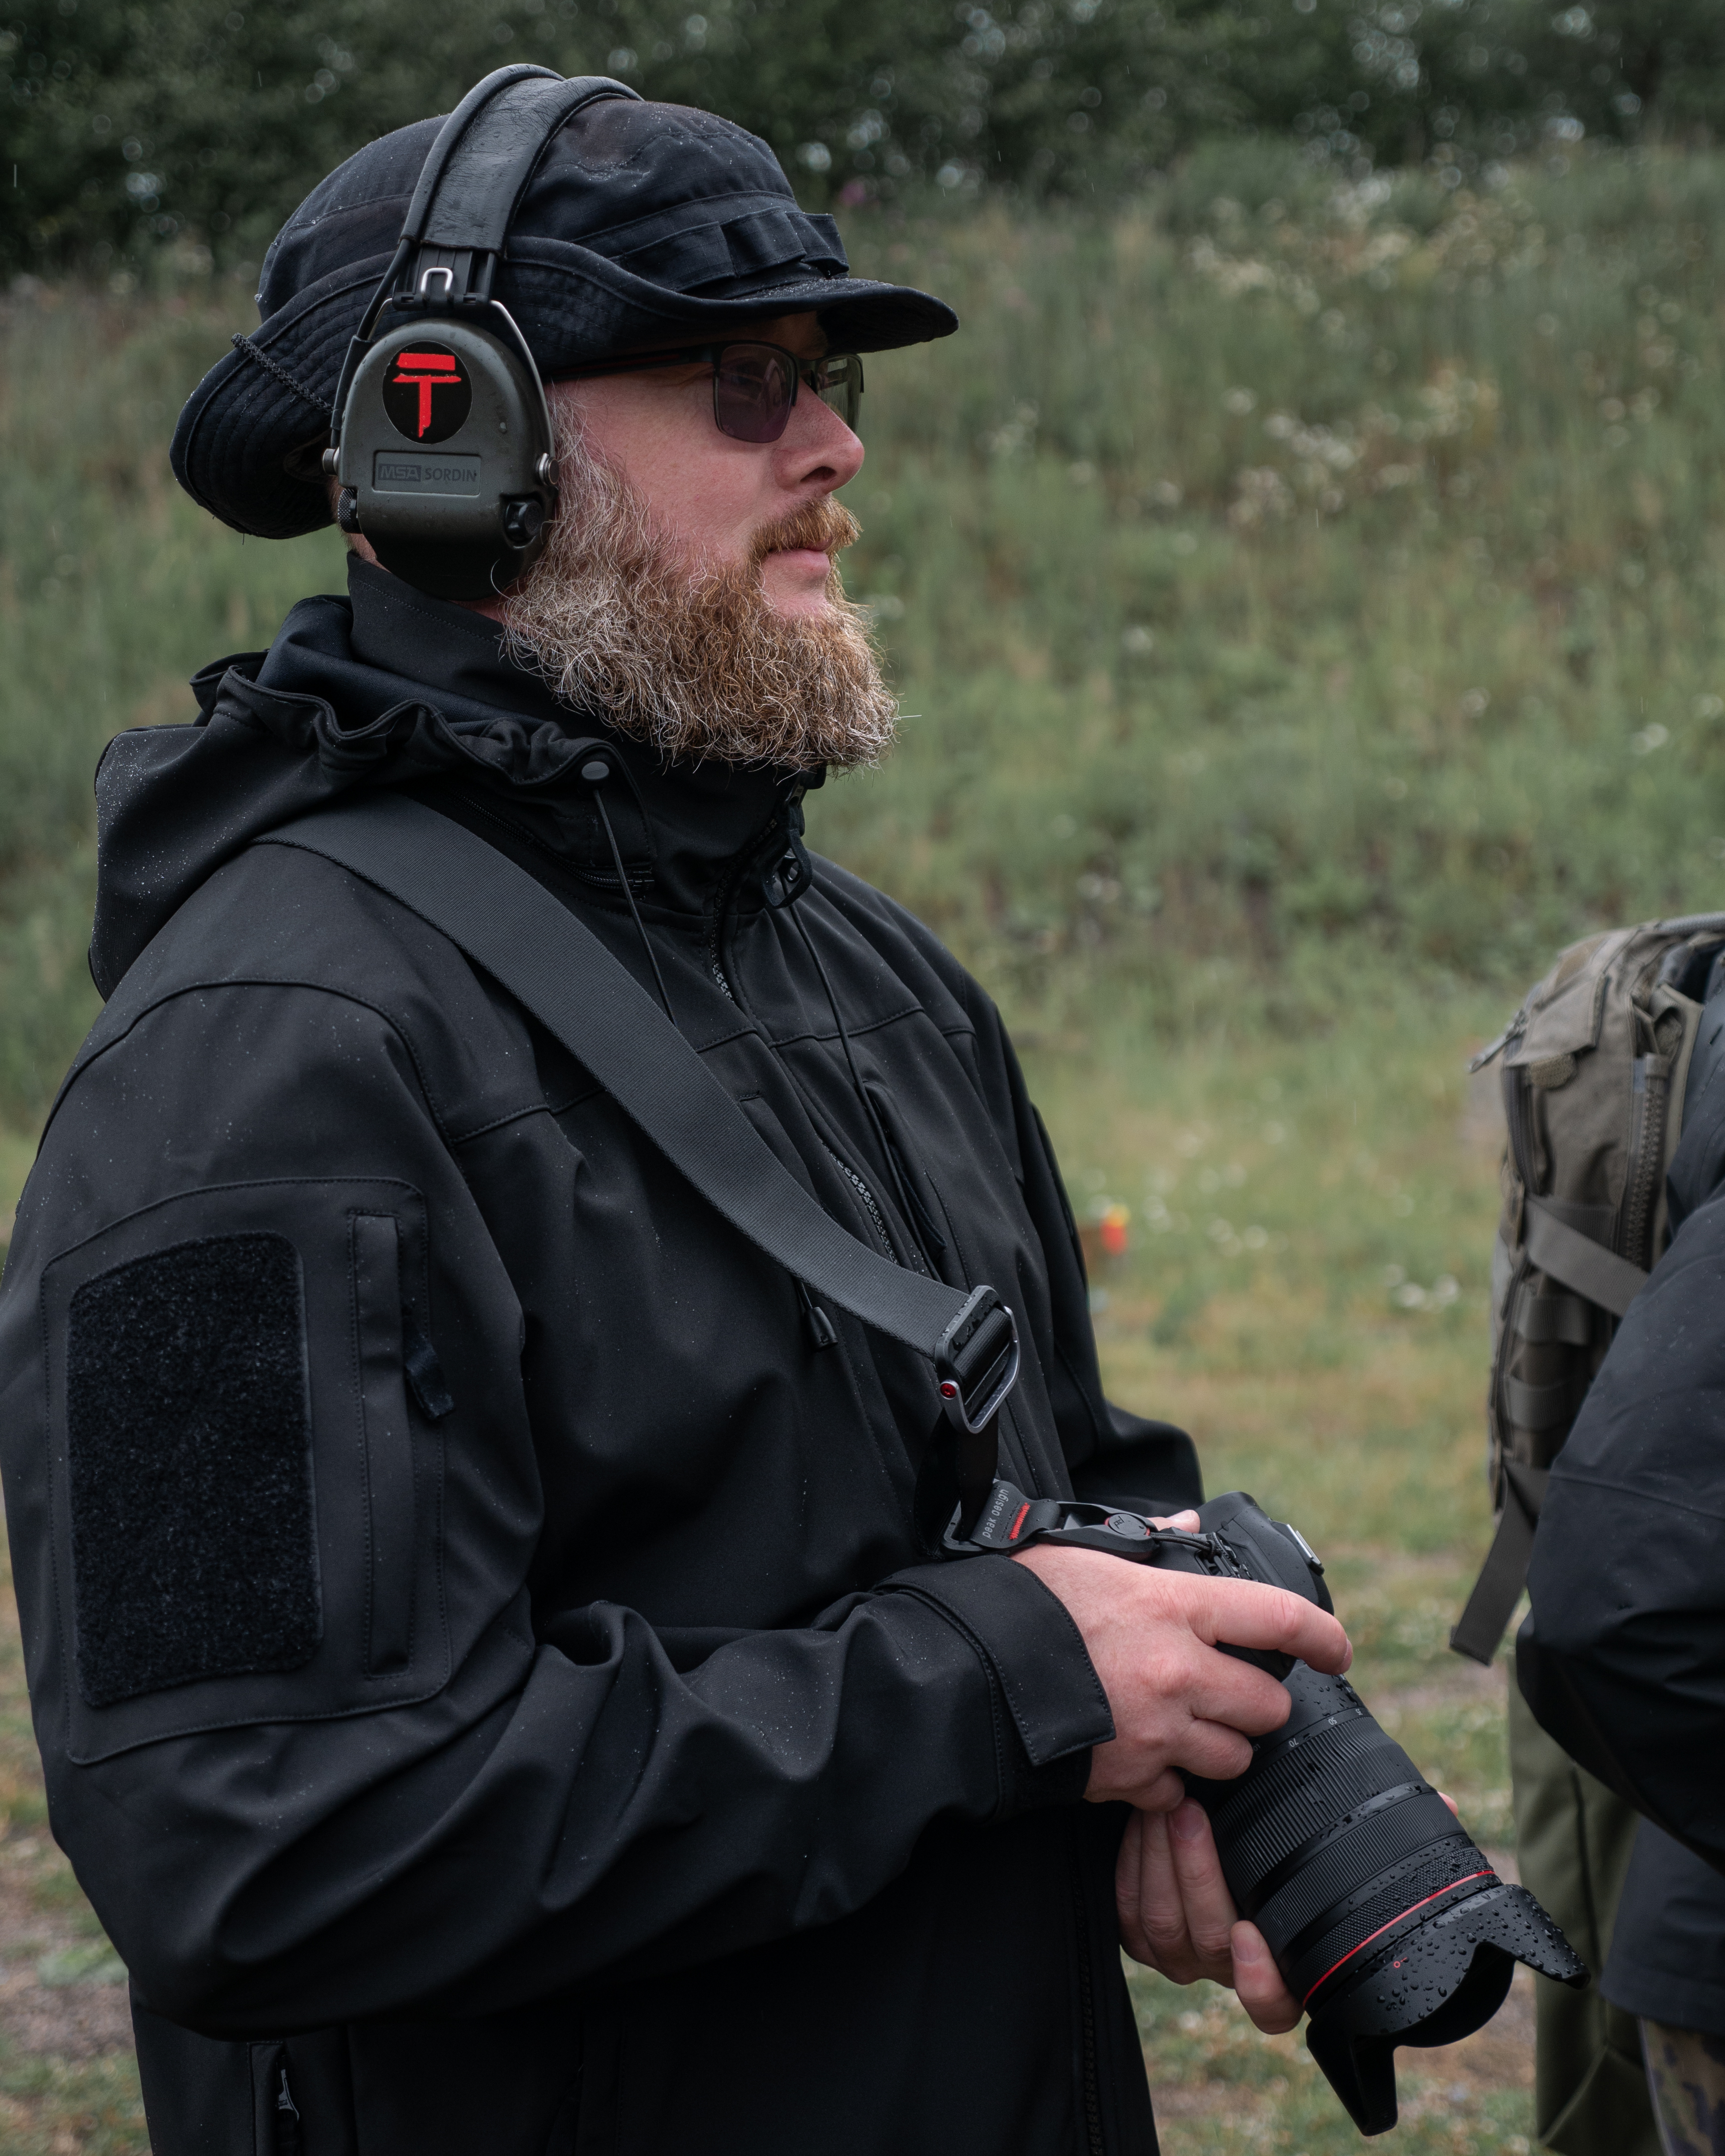 A man with camera. He has a boonie hat, headphones and a black rain jacket. He has a beard and glasses.